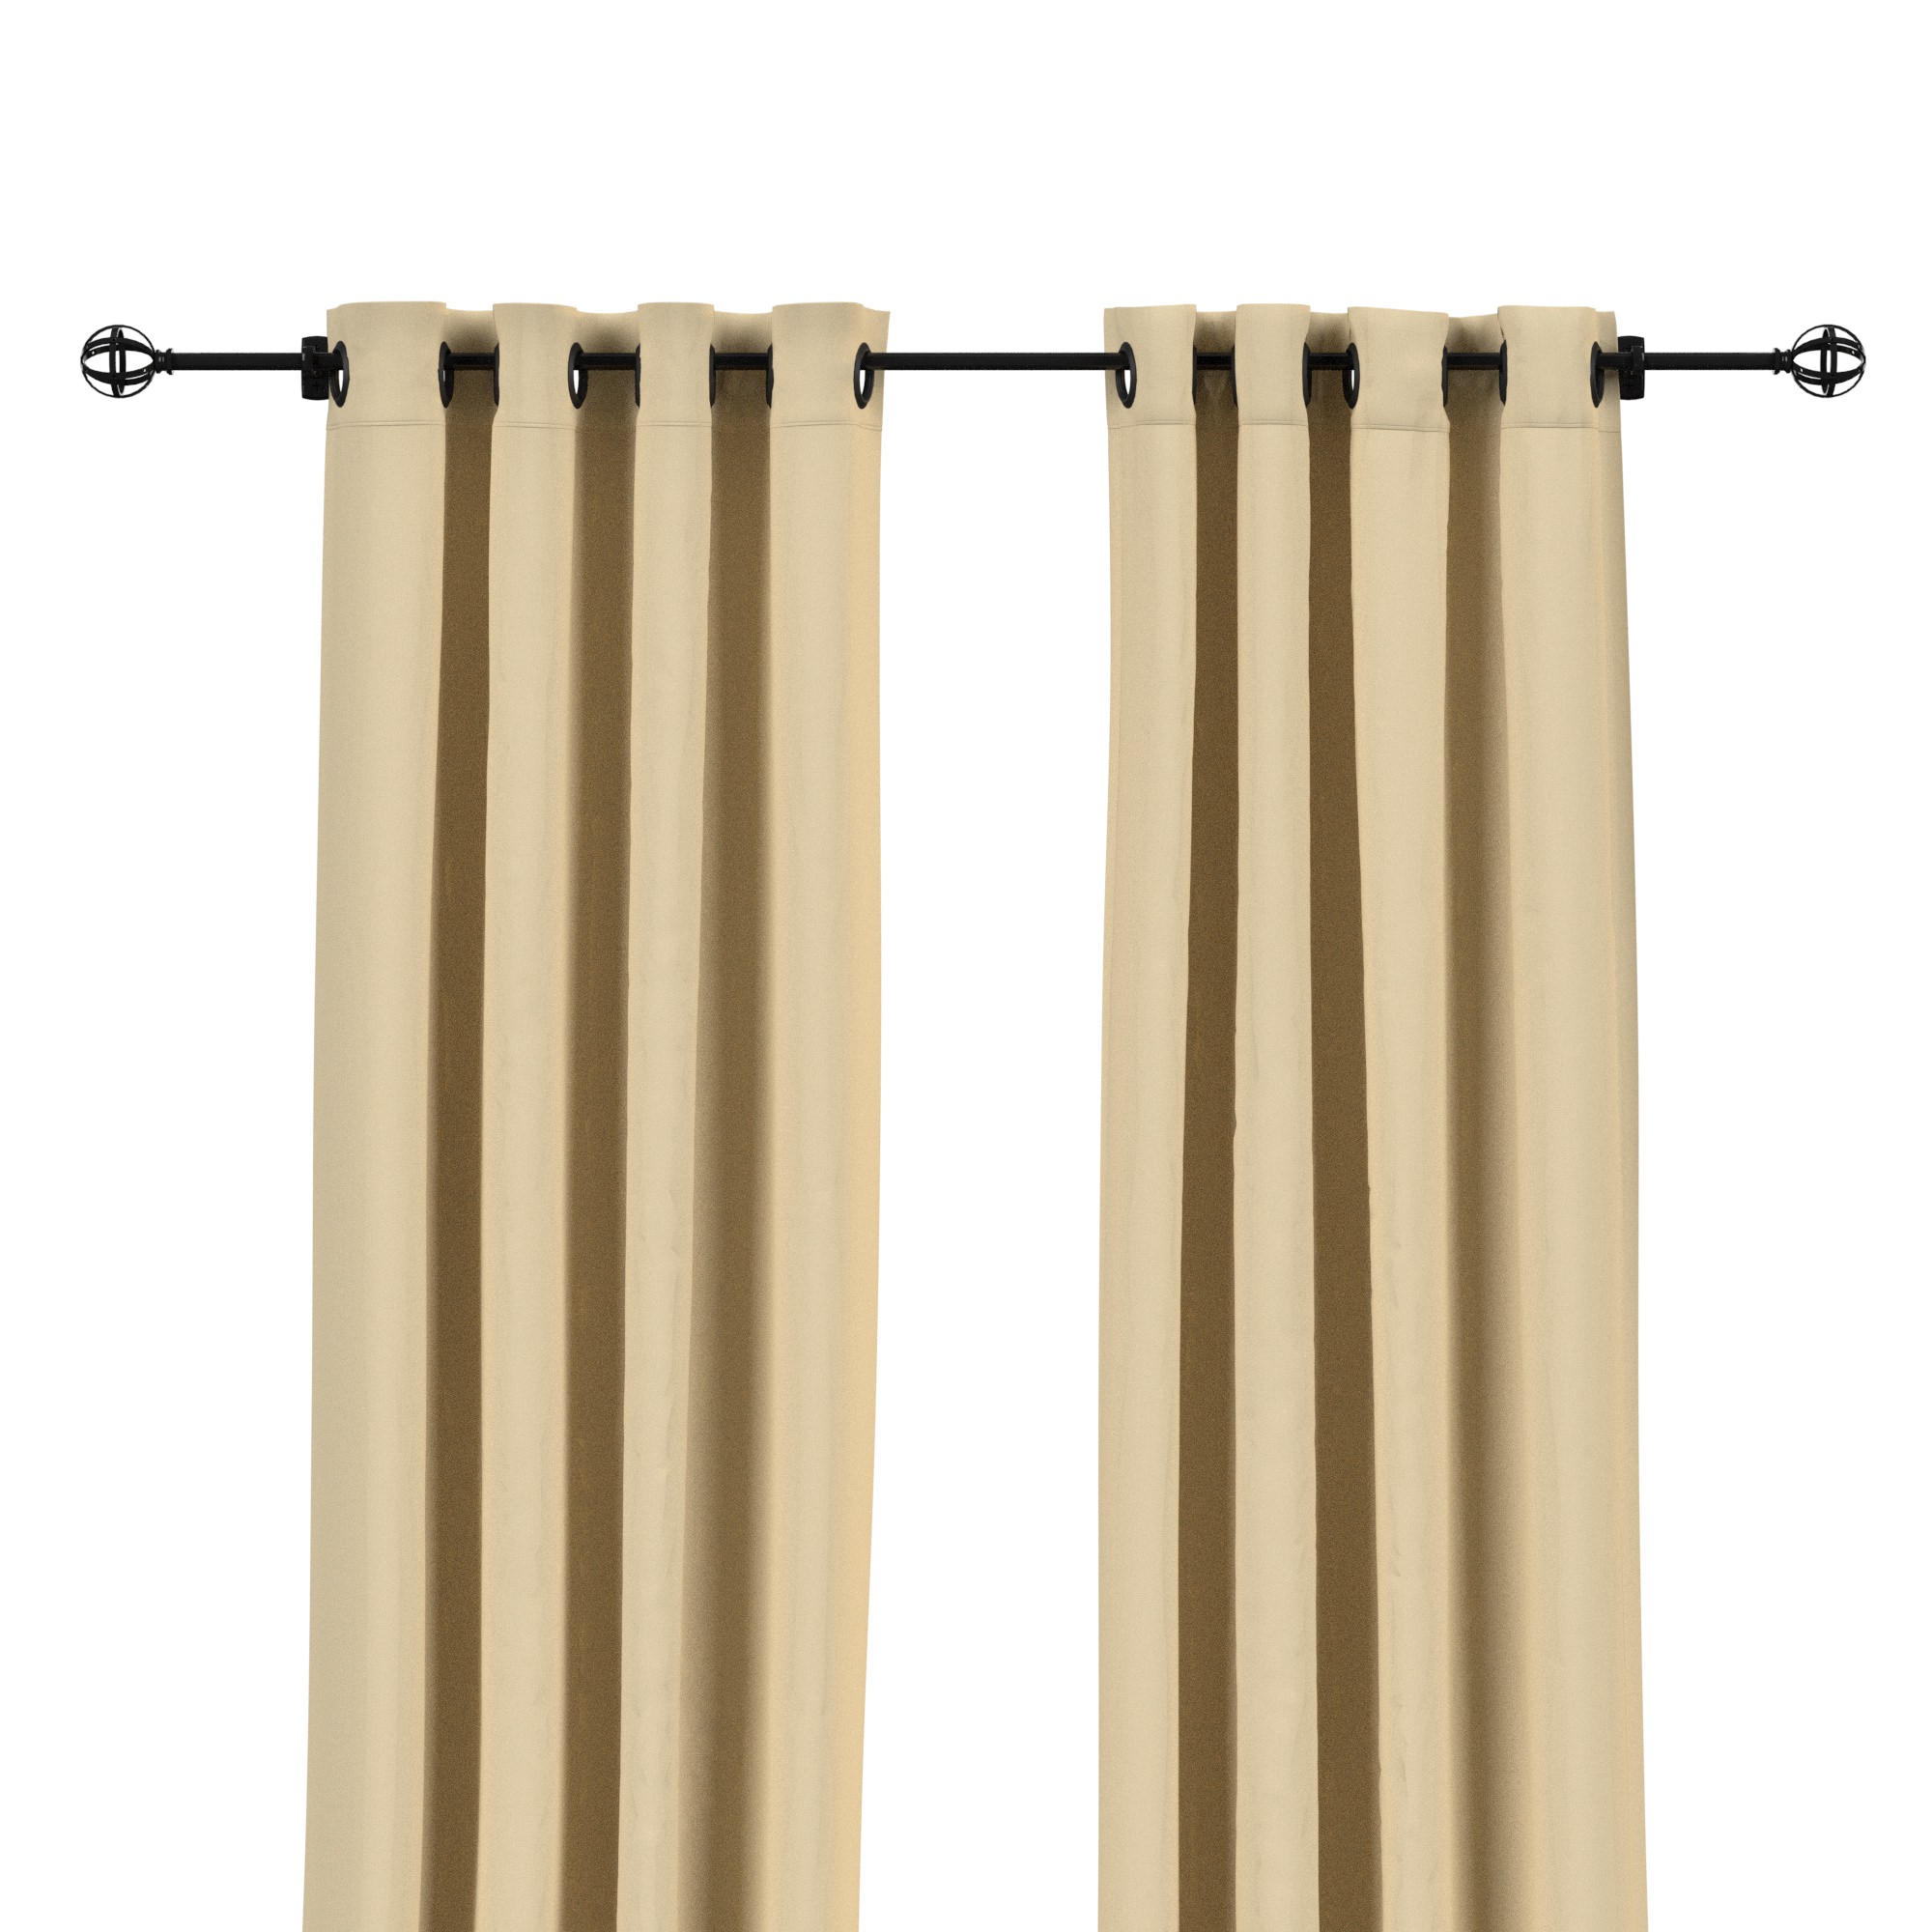 Types of Curtain Grommets & How to Install Them